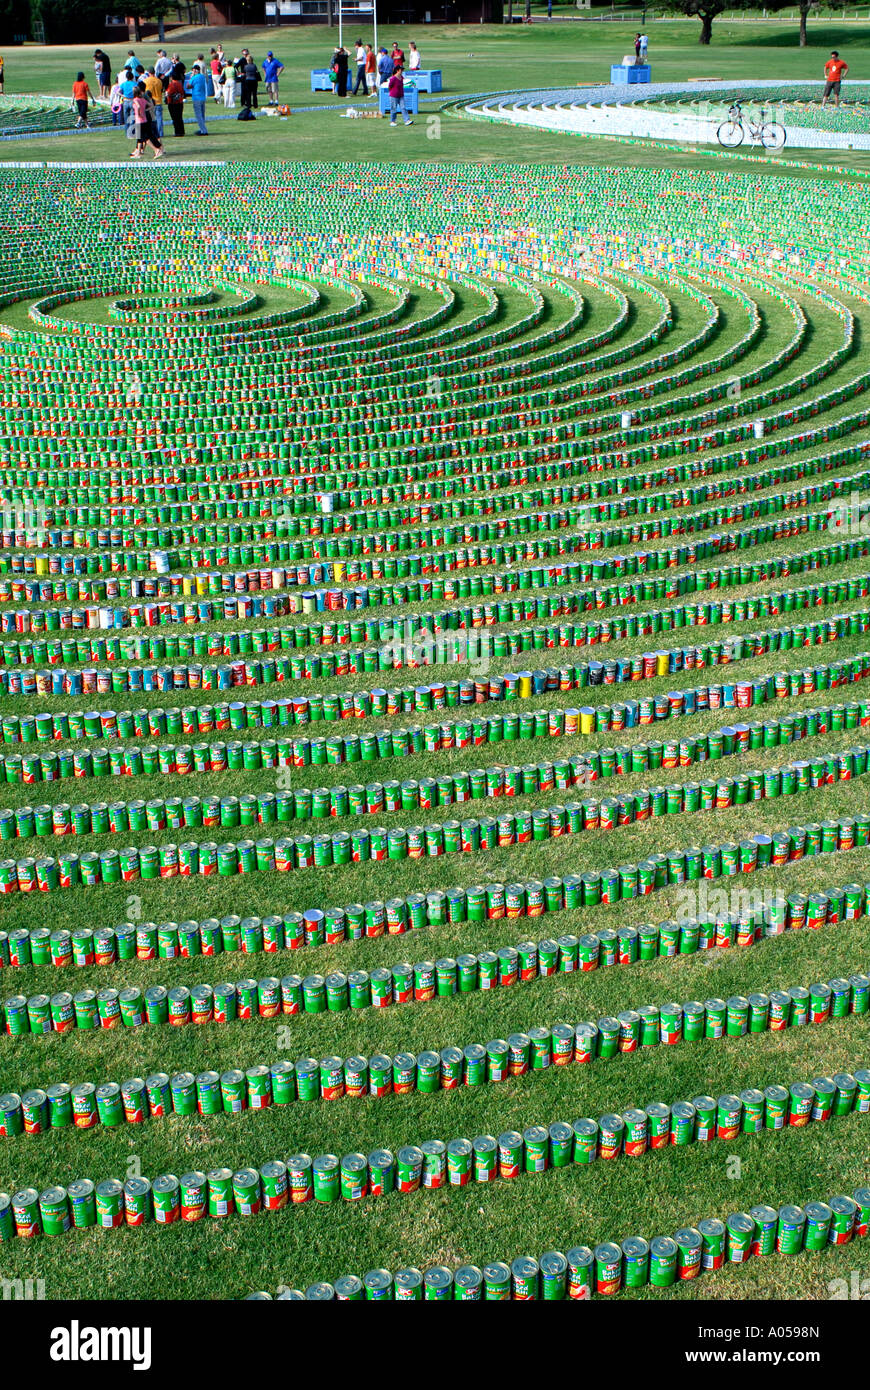 Over 69,000 cans of baked beans arranged into a world record continuous line. Perth, Western Australia Stock Photo